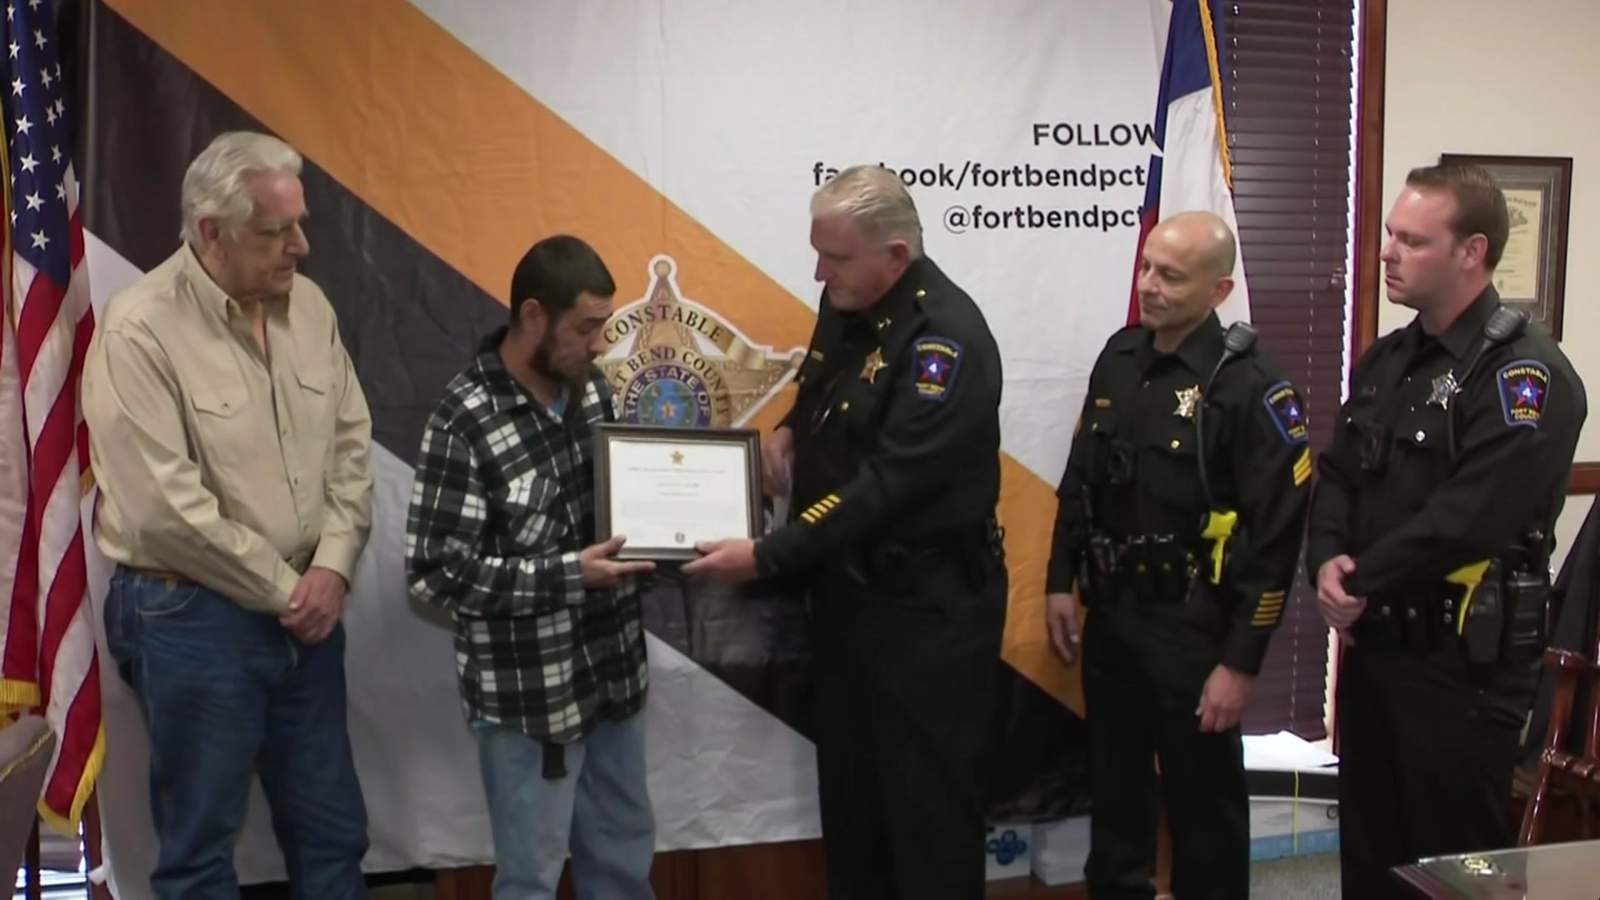 Man honored for saving driver from burning car who is now charged with crime